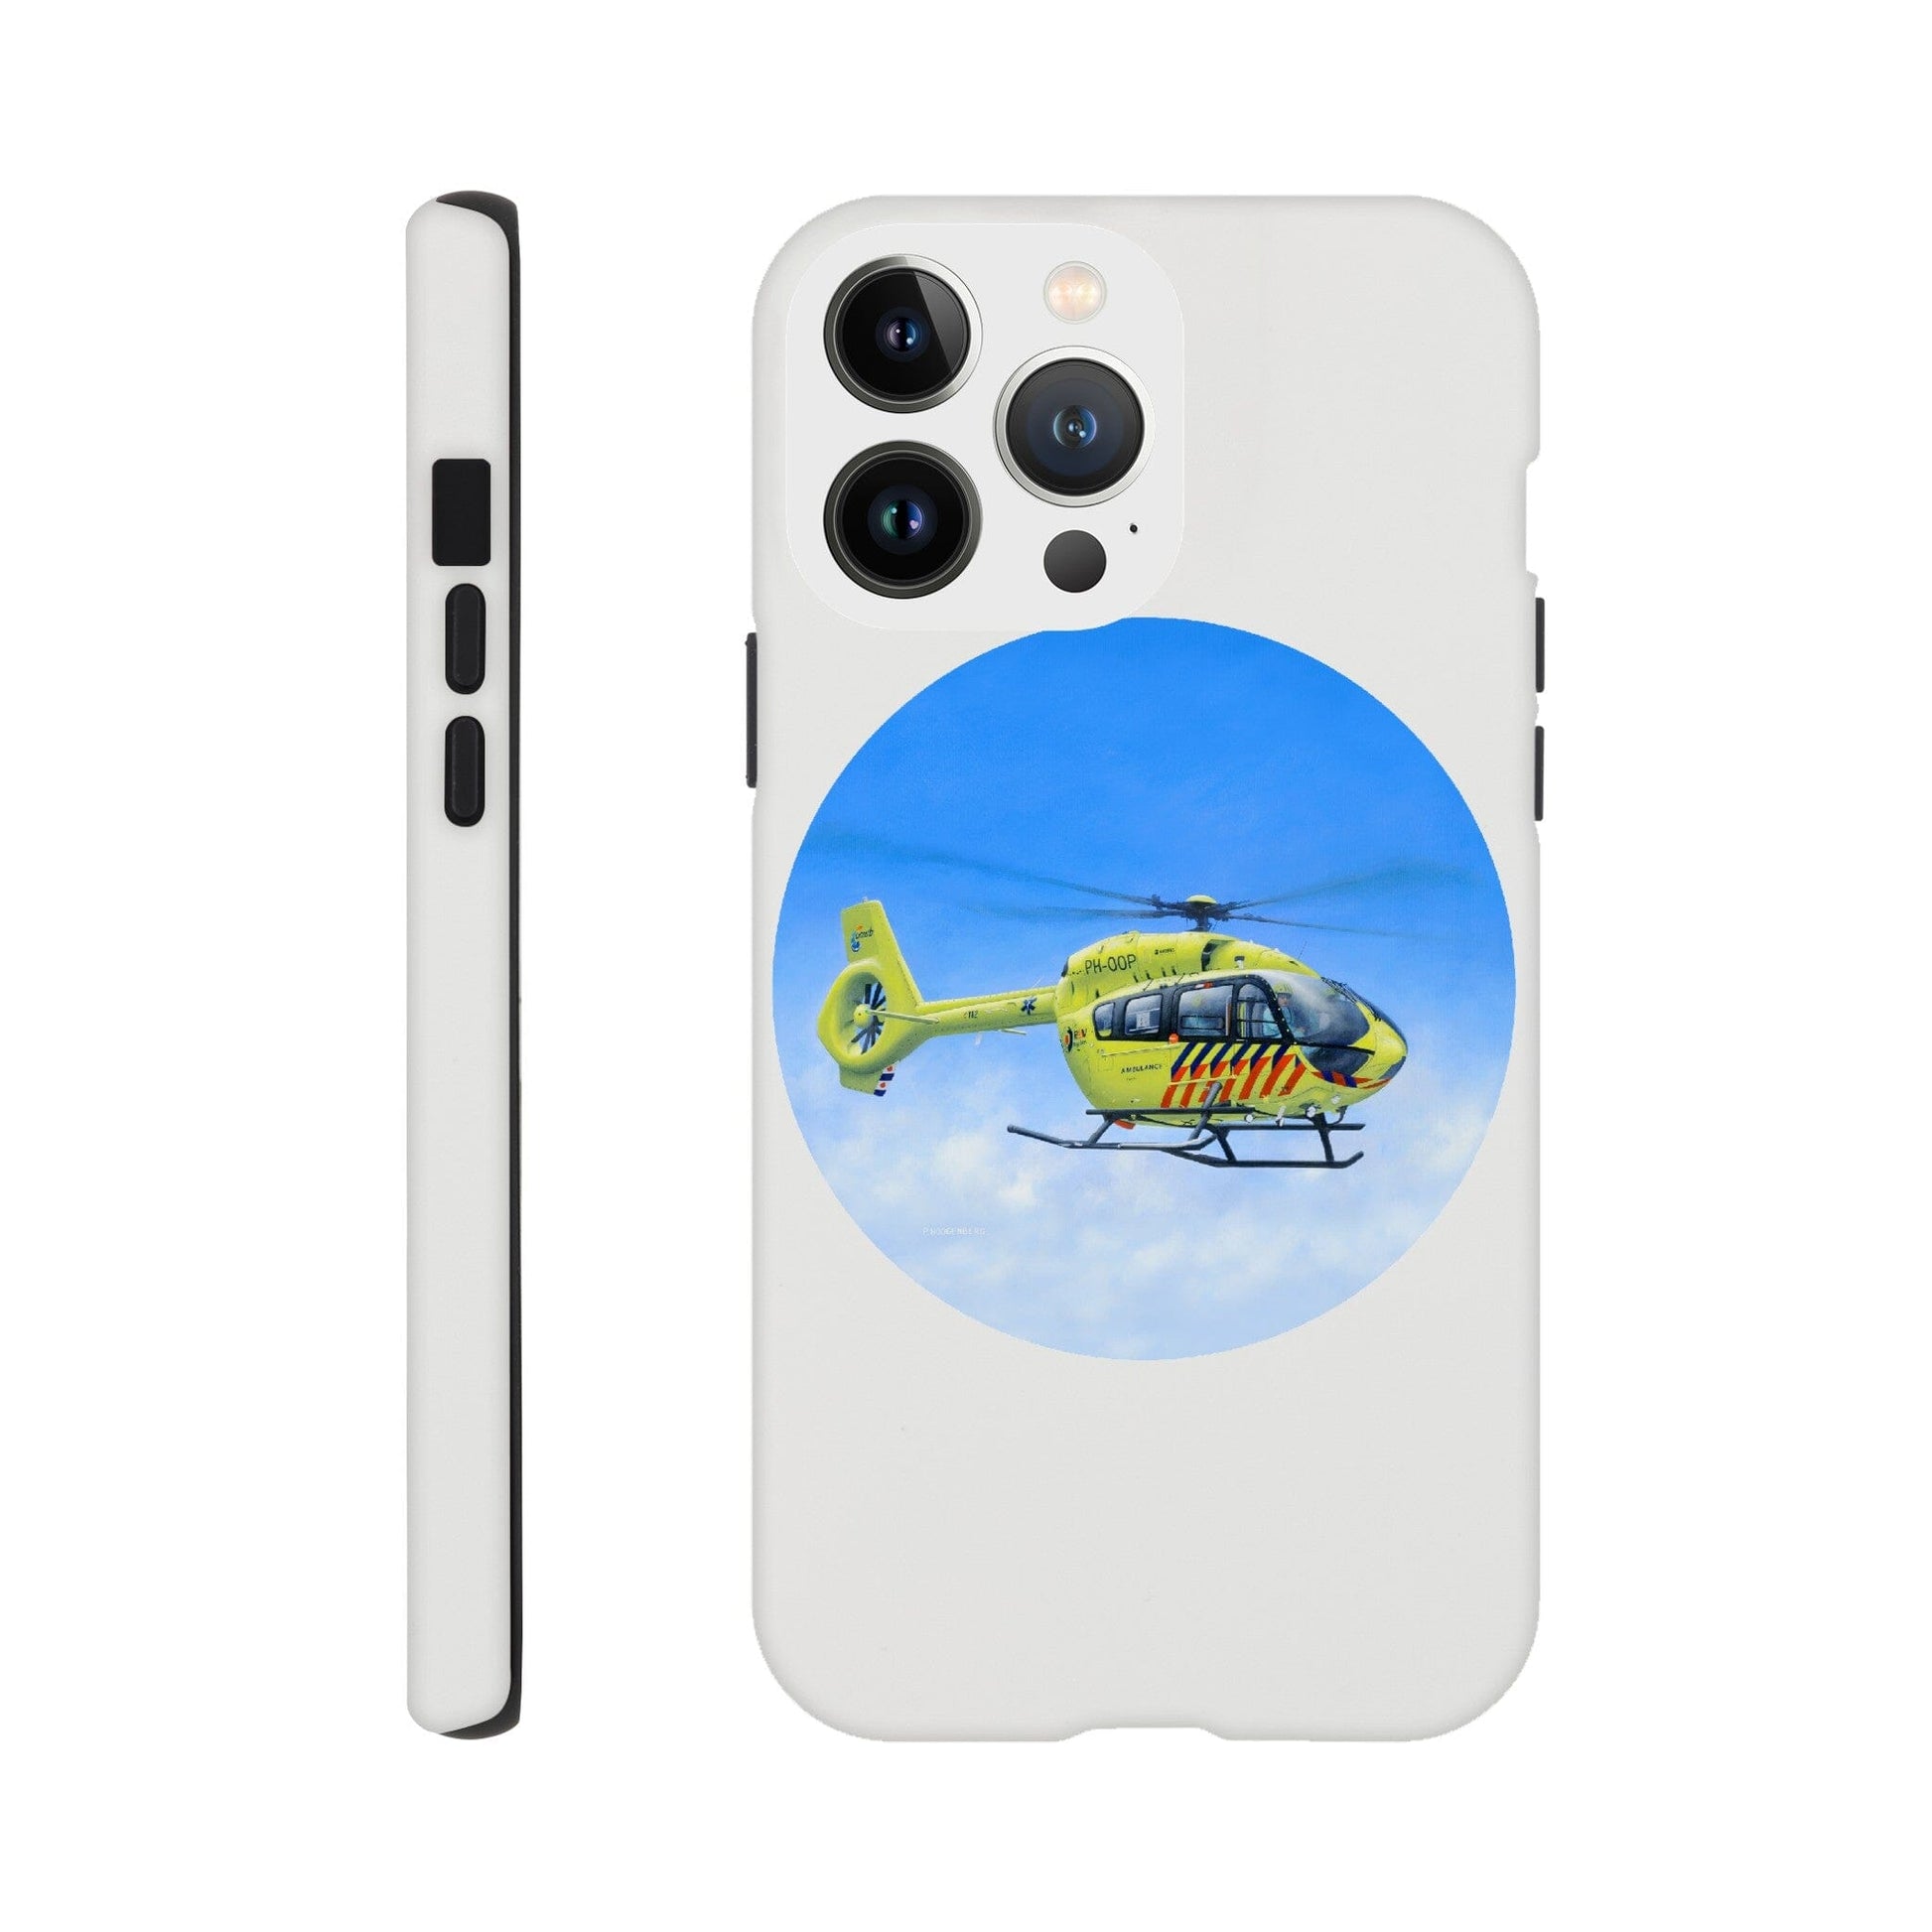 Peter Hoogenberg - Phone Case Tough - Ambulance Helicopter Wadden Islands Phone Case TP Aviation Art iPhone 13 Pro Max 